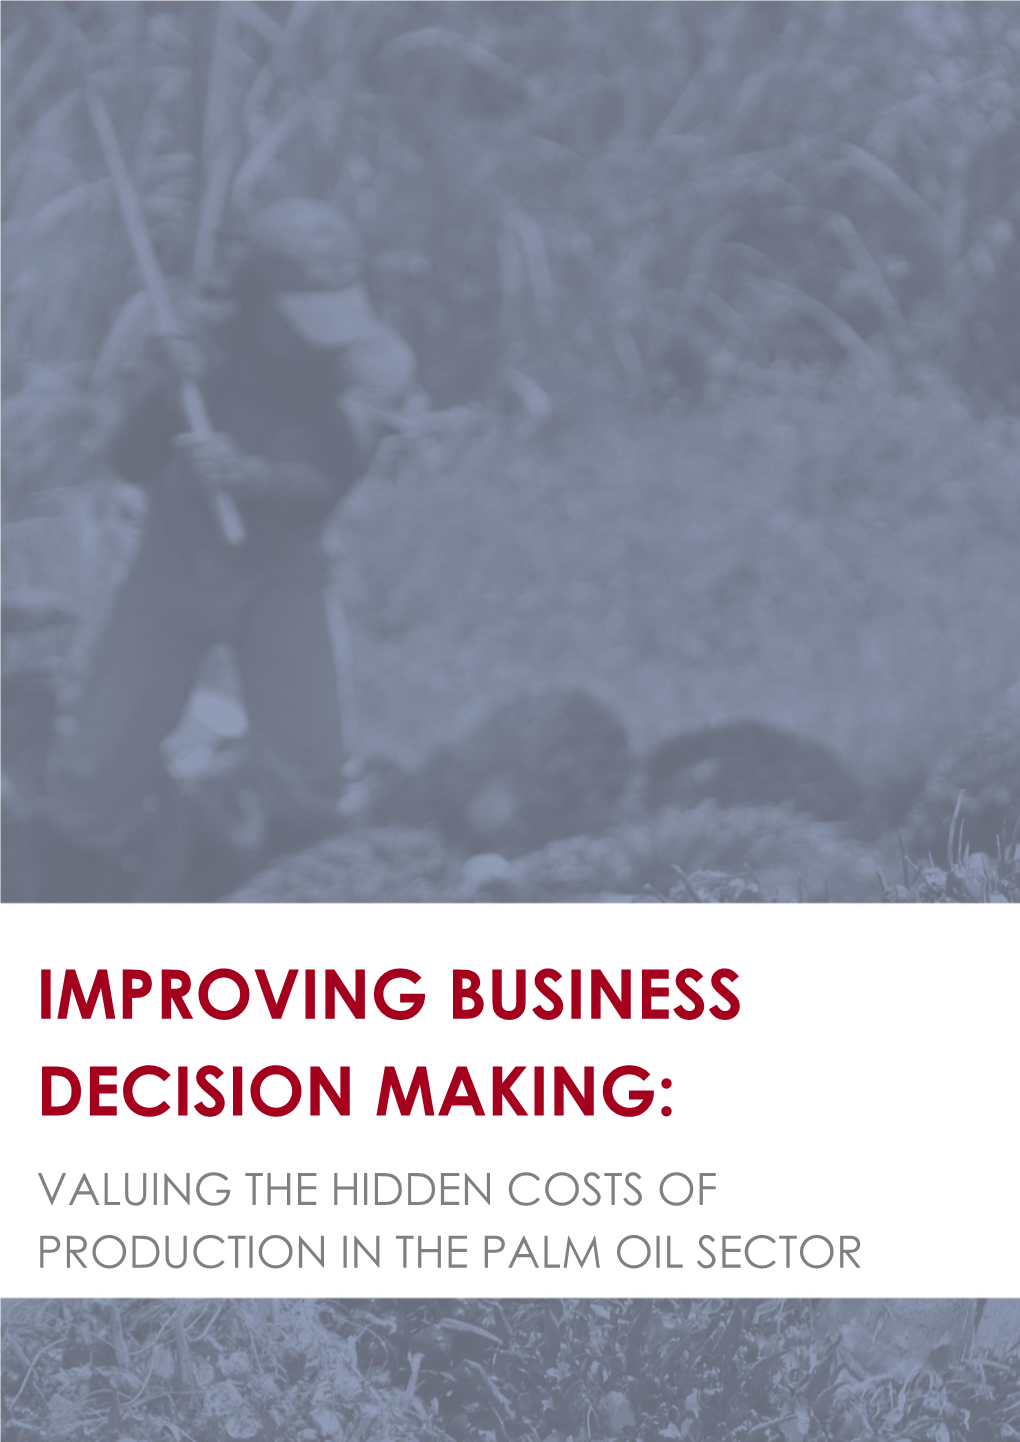 Improving Business Decision Making: Valuing the Hidden Costs of Production in the Palm Oil Sector